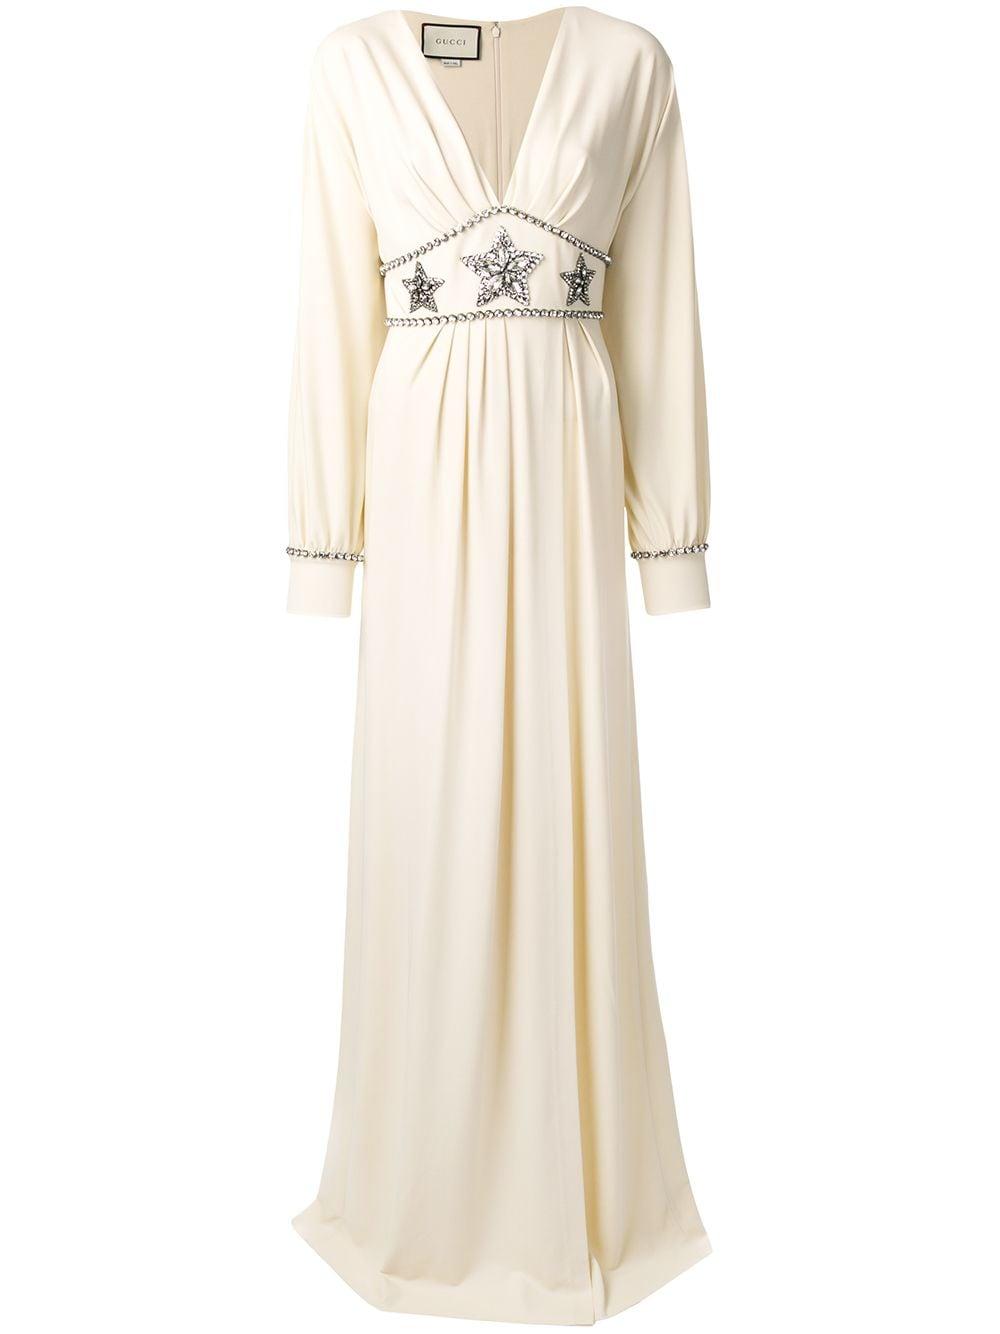 Gucci Star Embellished Maxi Dress in Natural | Lyst